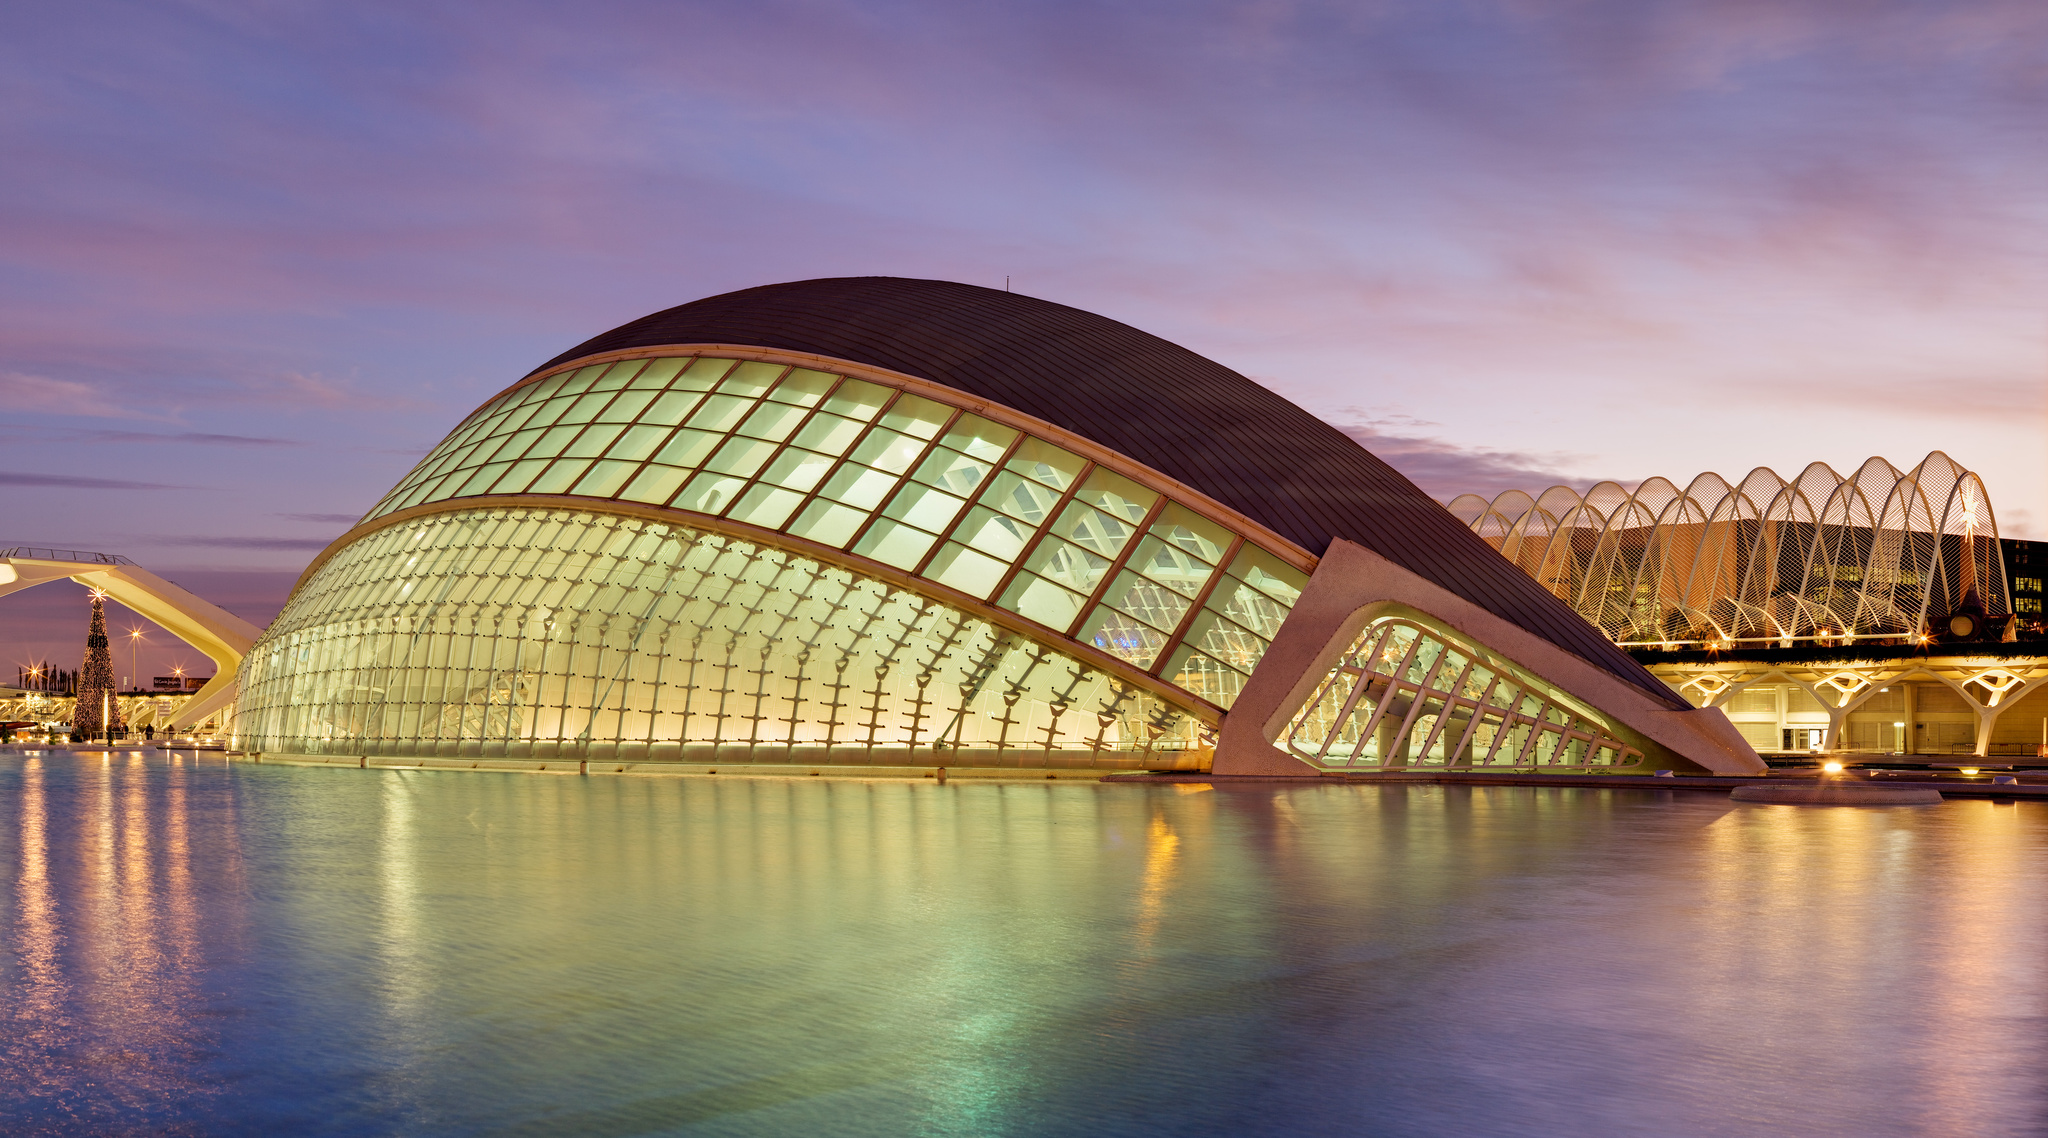 City of Arts and Sciences